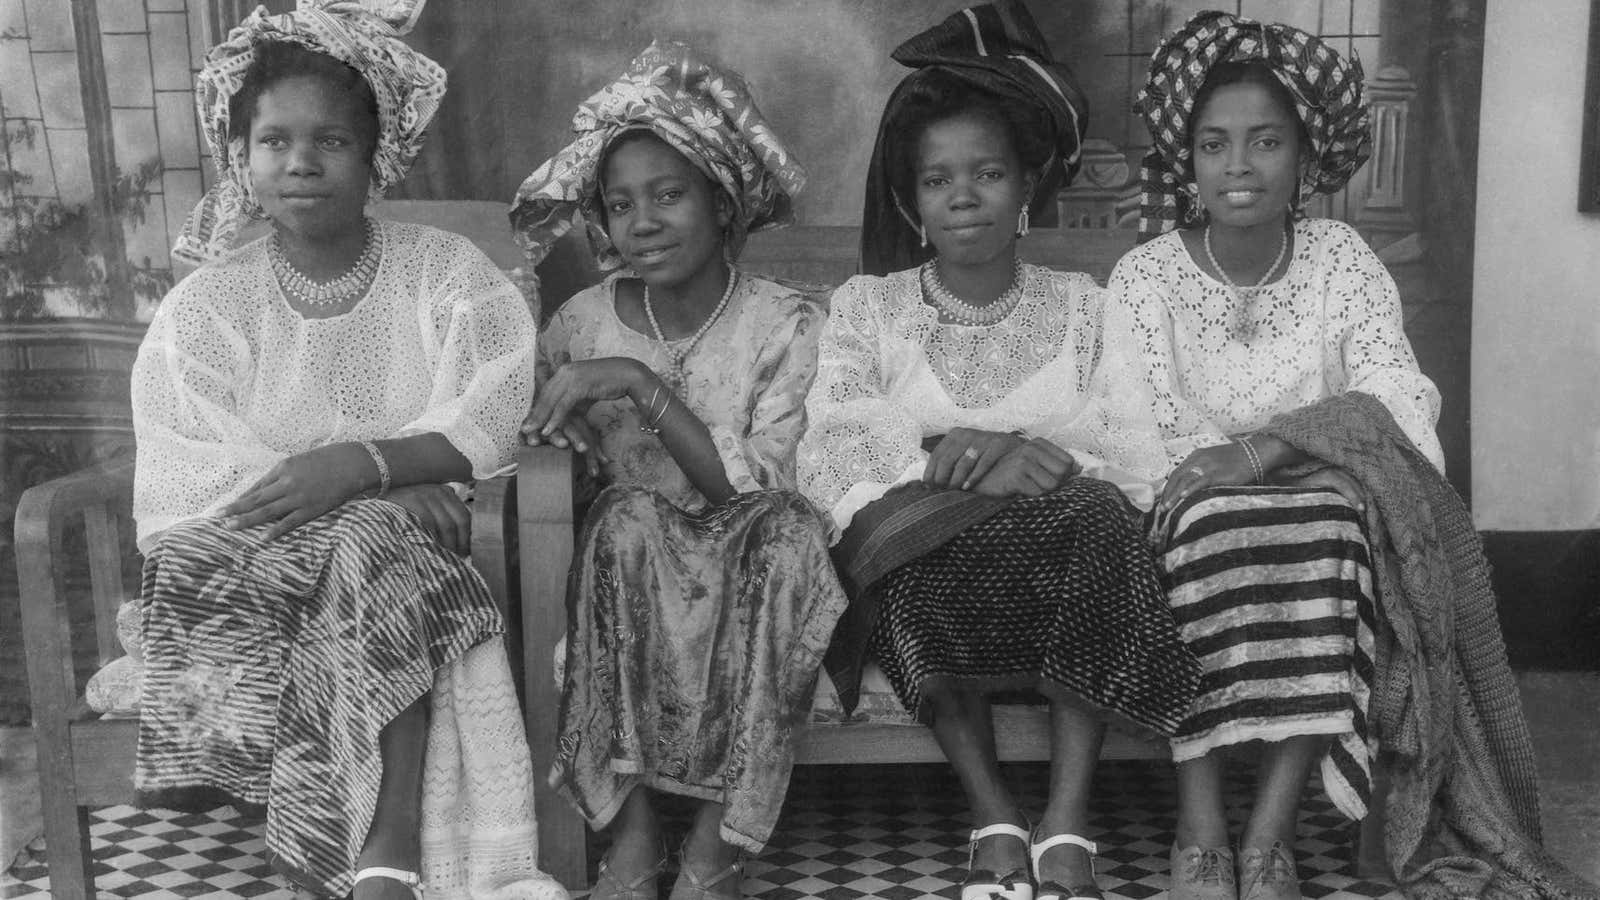 A portrait of four sisters from the Ideal Photo Studio in Benin City in 1950.